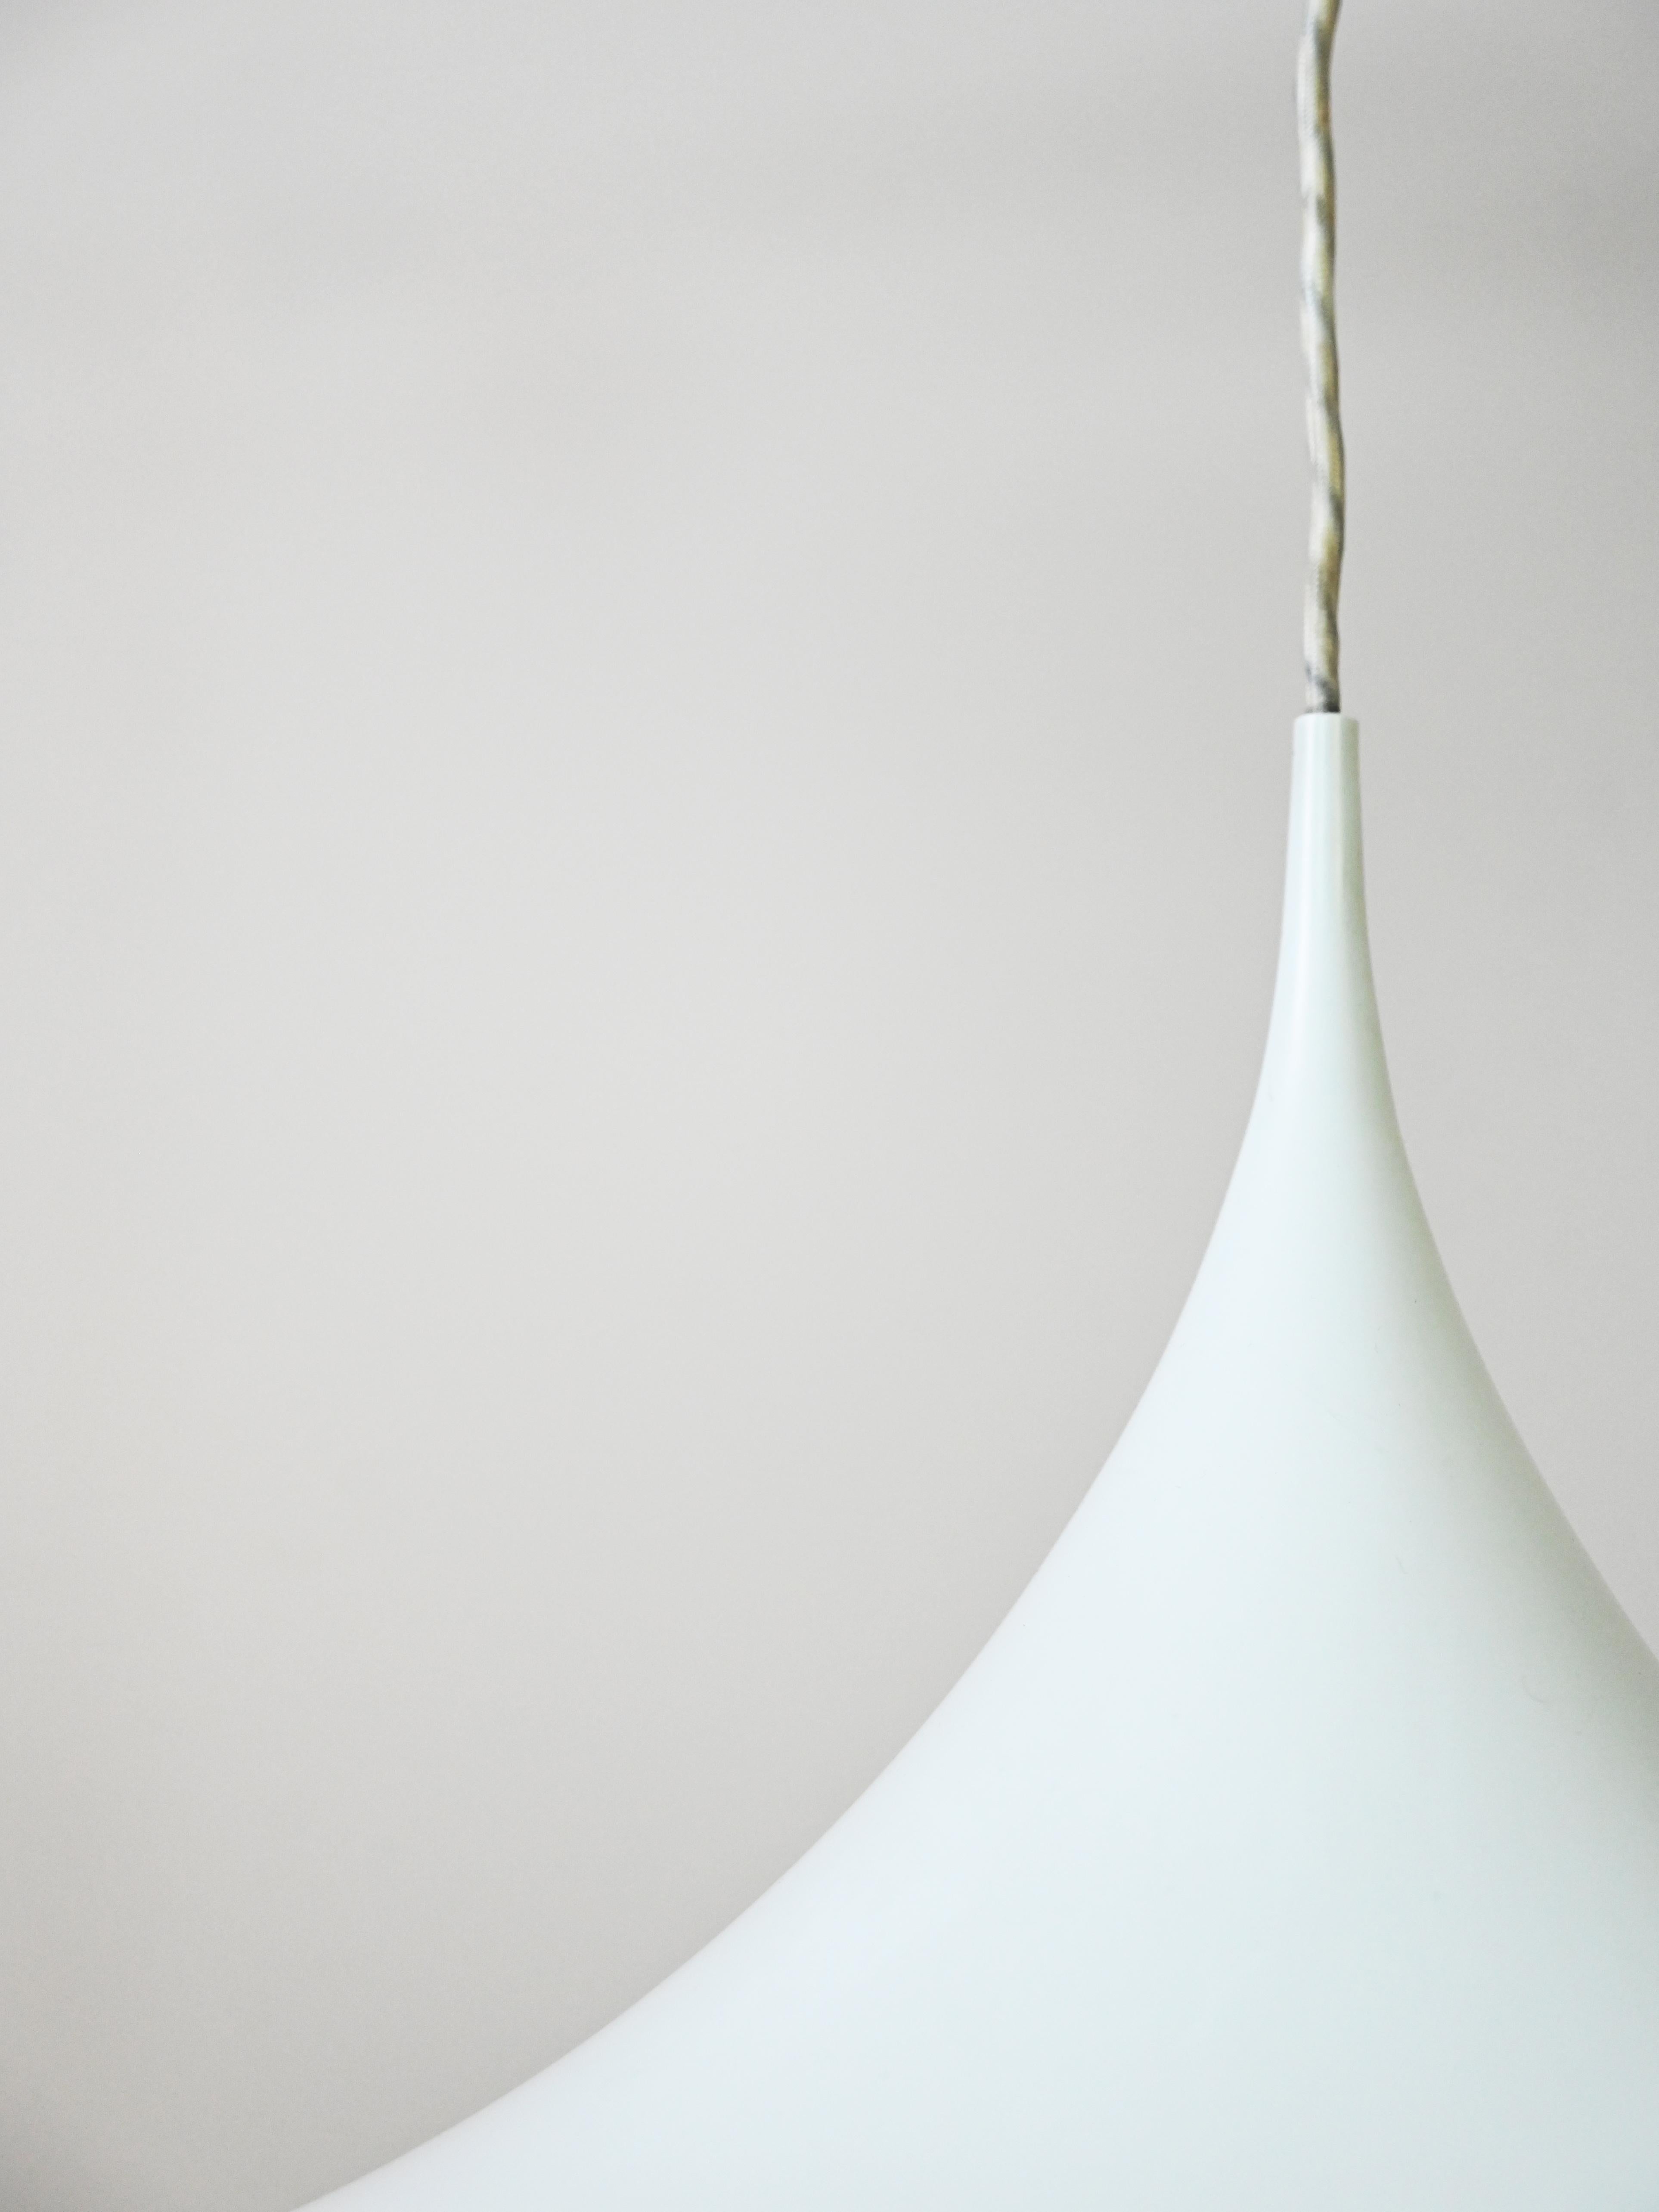 An icon of Scandinavian design, Semi is the result of a collaboration between two renowned Danish designers: Torsten Thorup and Claus Bonderup.

Made from matte white enameled metal, it exudes an elegant and refined aesthetic. The lampshade's shape